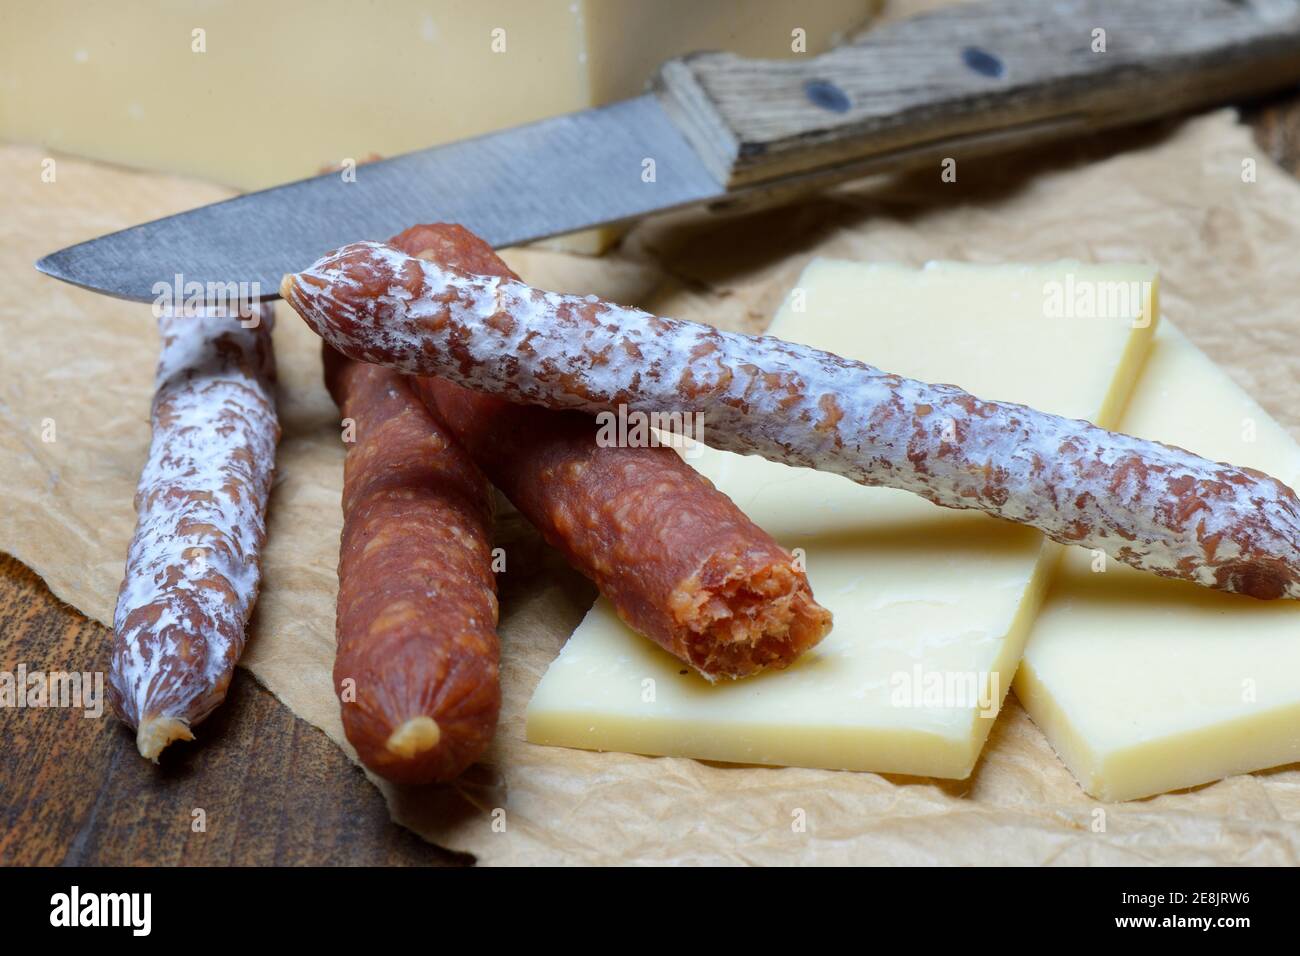 Different kinds of sausages and cheese slices Stock Photo